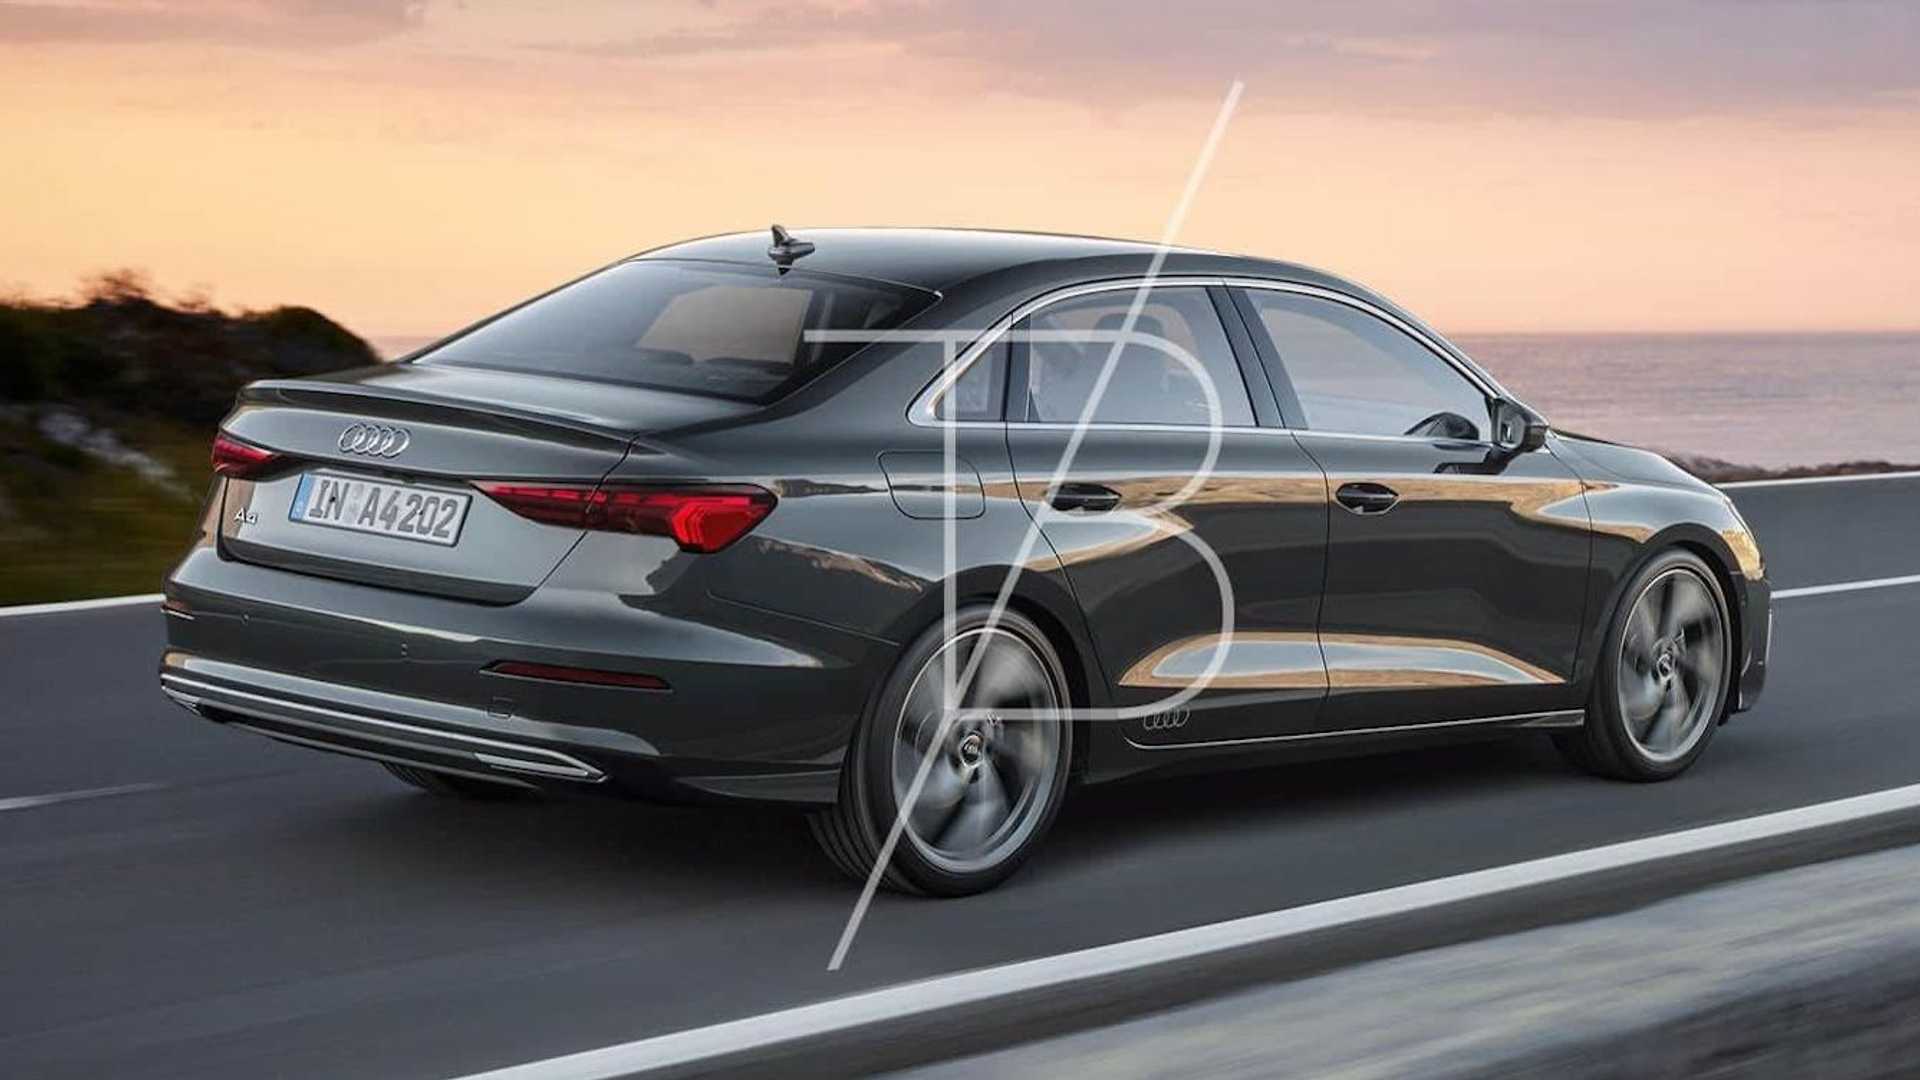 2023 Audi A4 Prices, Reviews, and Photos - MotorTrend